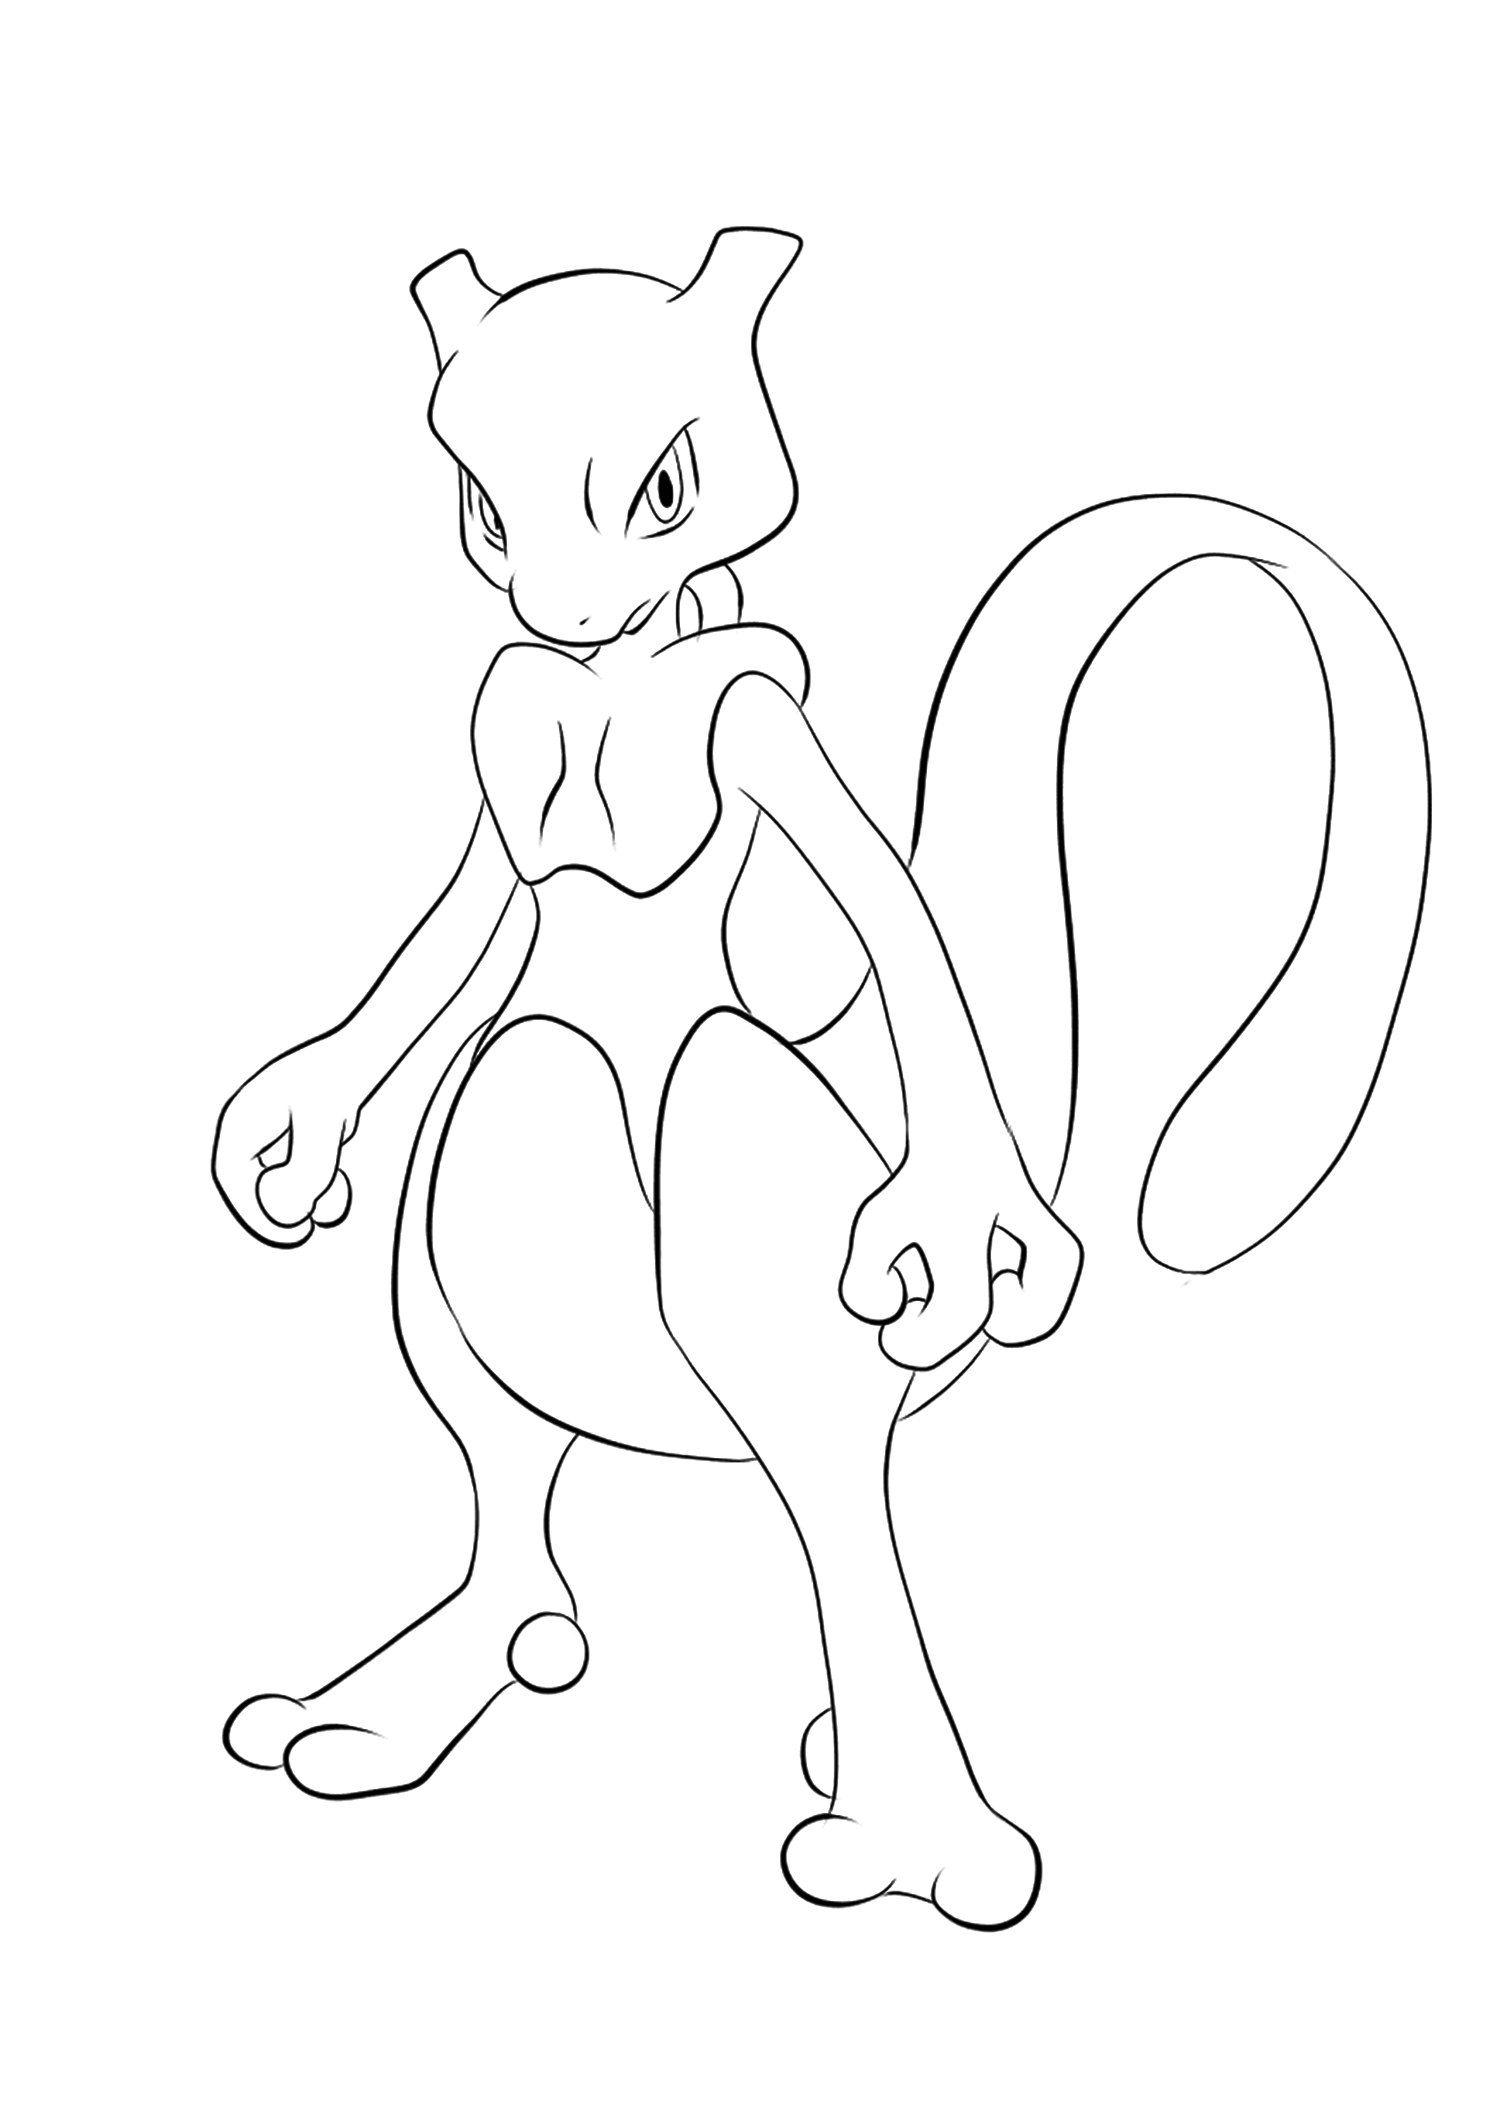 Mewtwo (No.150). Mewtwo Coloring page, Generation I Pokemon of type PsychicOriginal image credit: Pokemon linearts by Lilly Gerbil on Deviantart.Permission:  All rights reserved © Pokemon company and Ken Sugimori.